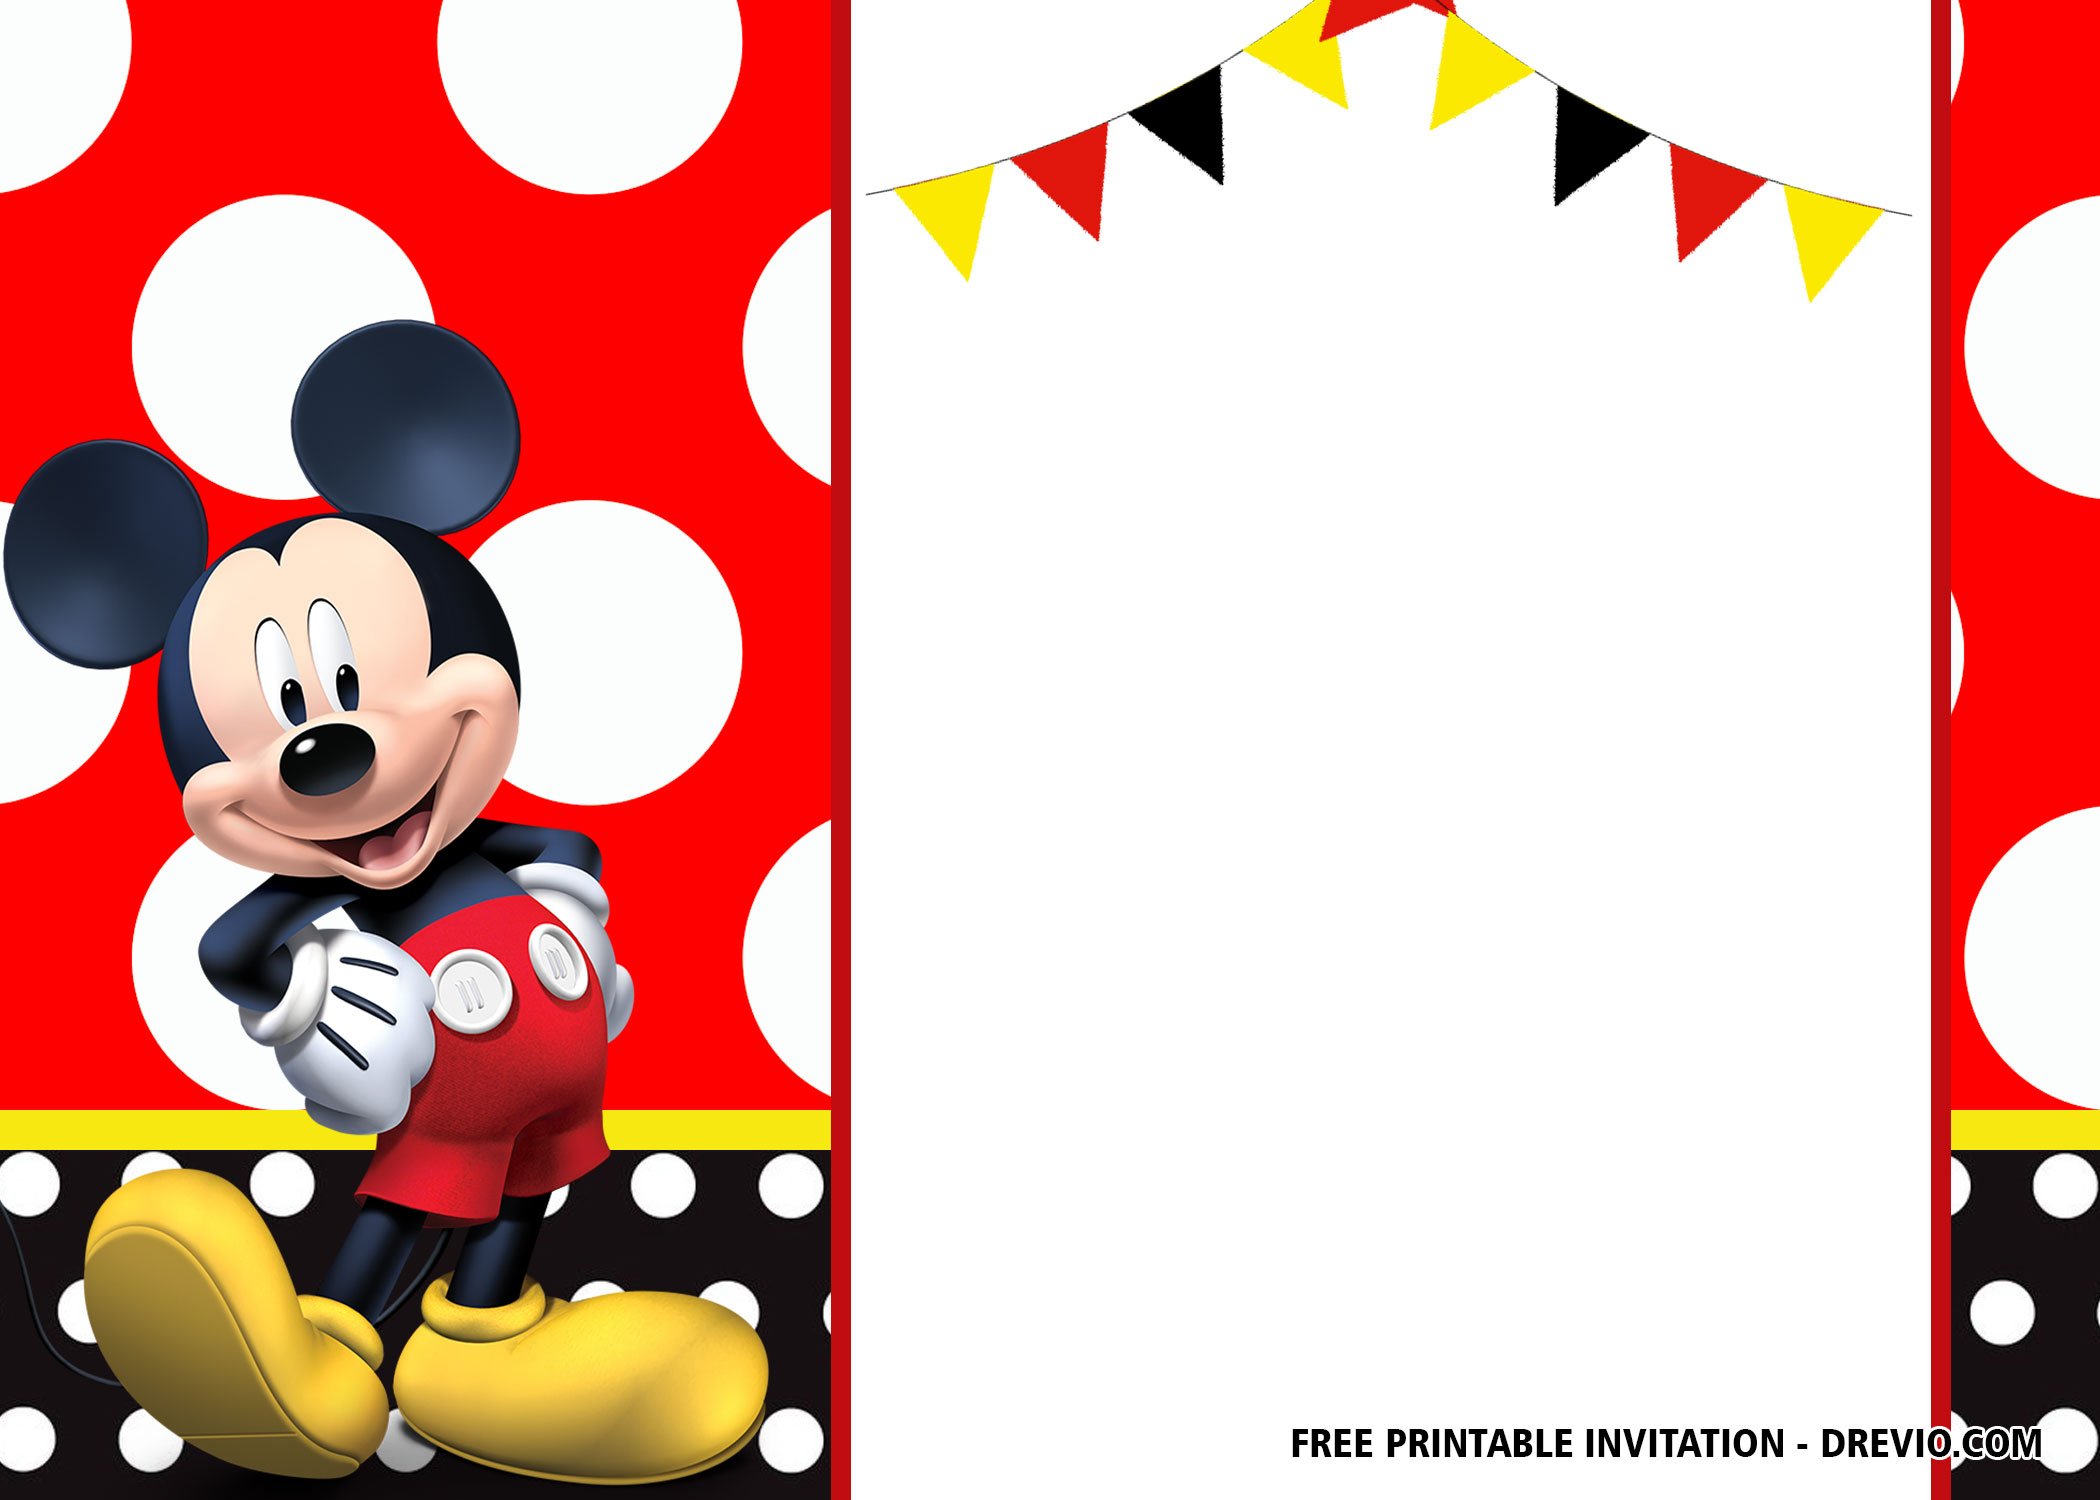 FREE Mickey Mouse Birthday Invitation Templates Latest Download Hundreds FREE PRINTABLE